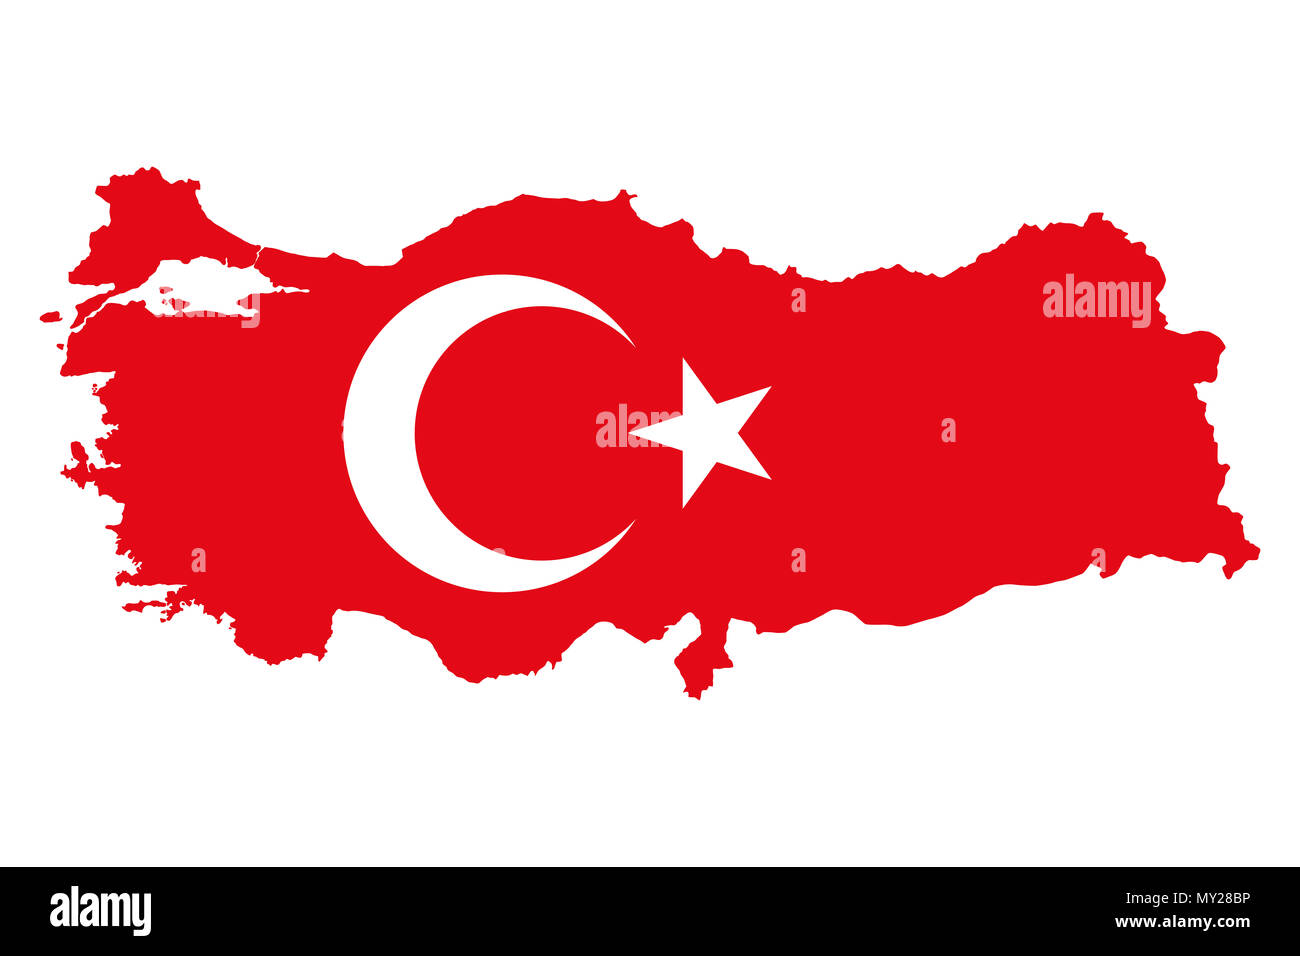 Flag of Turkey in country silhouette. Al bayrak. Red flag with white star and crescent, in the country outline. Transcontinental country in Eurasia. Stock Photo